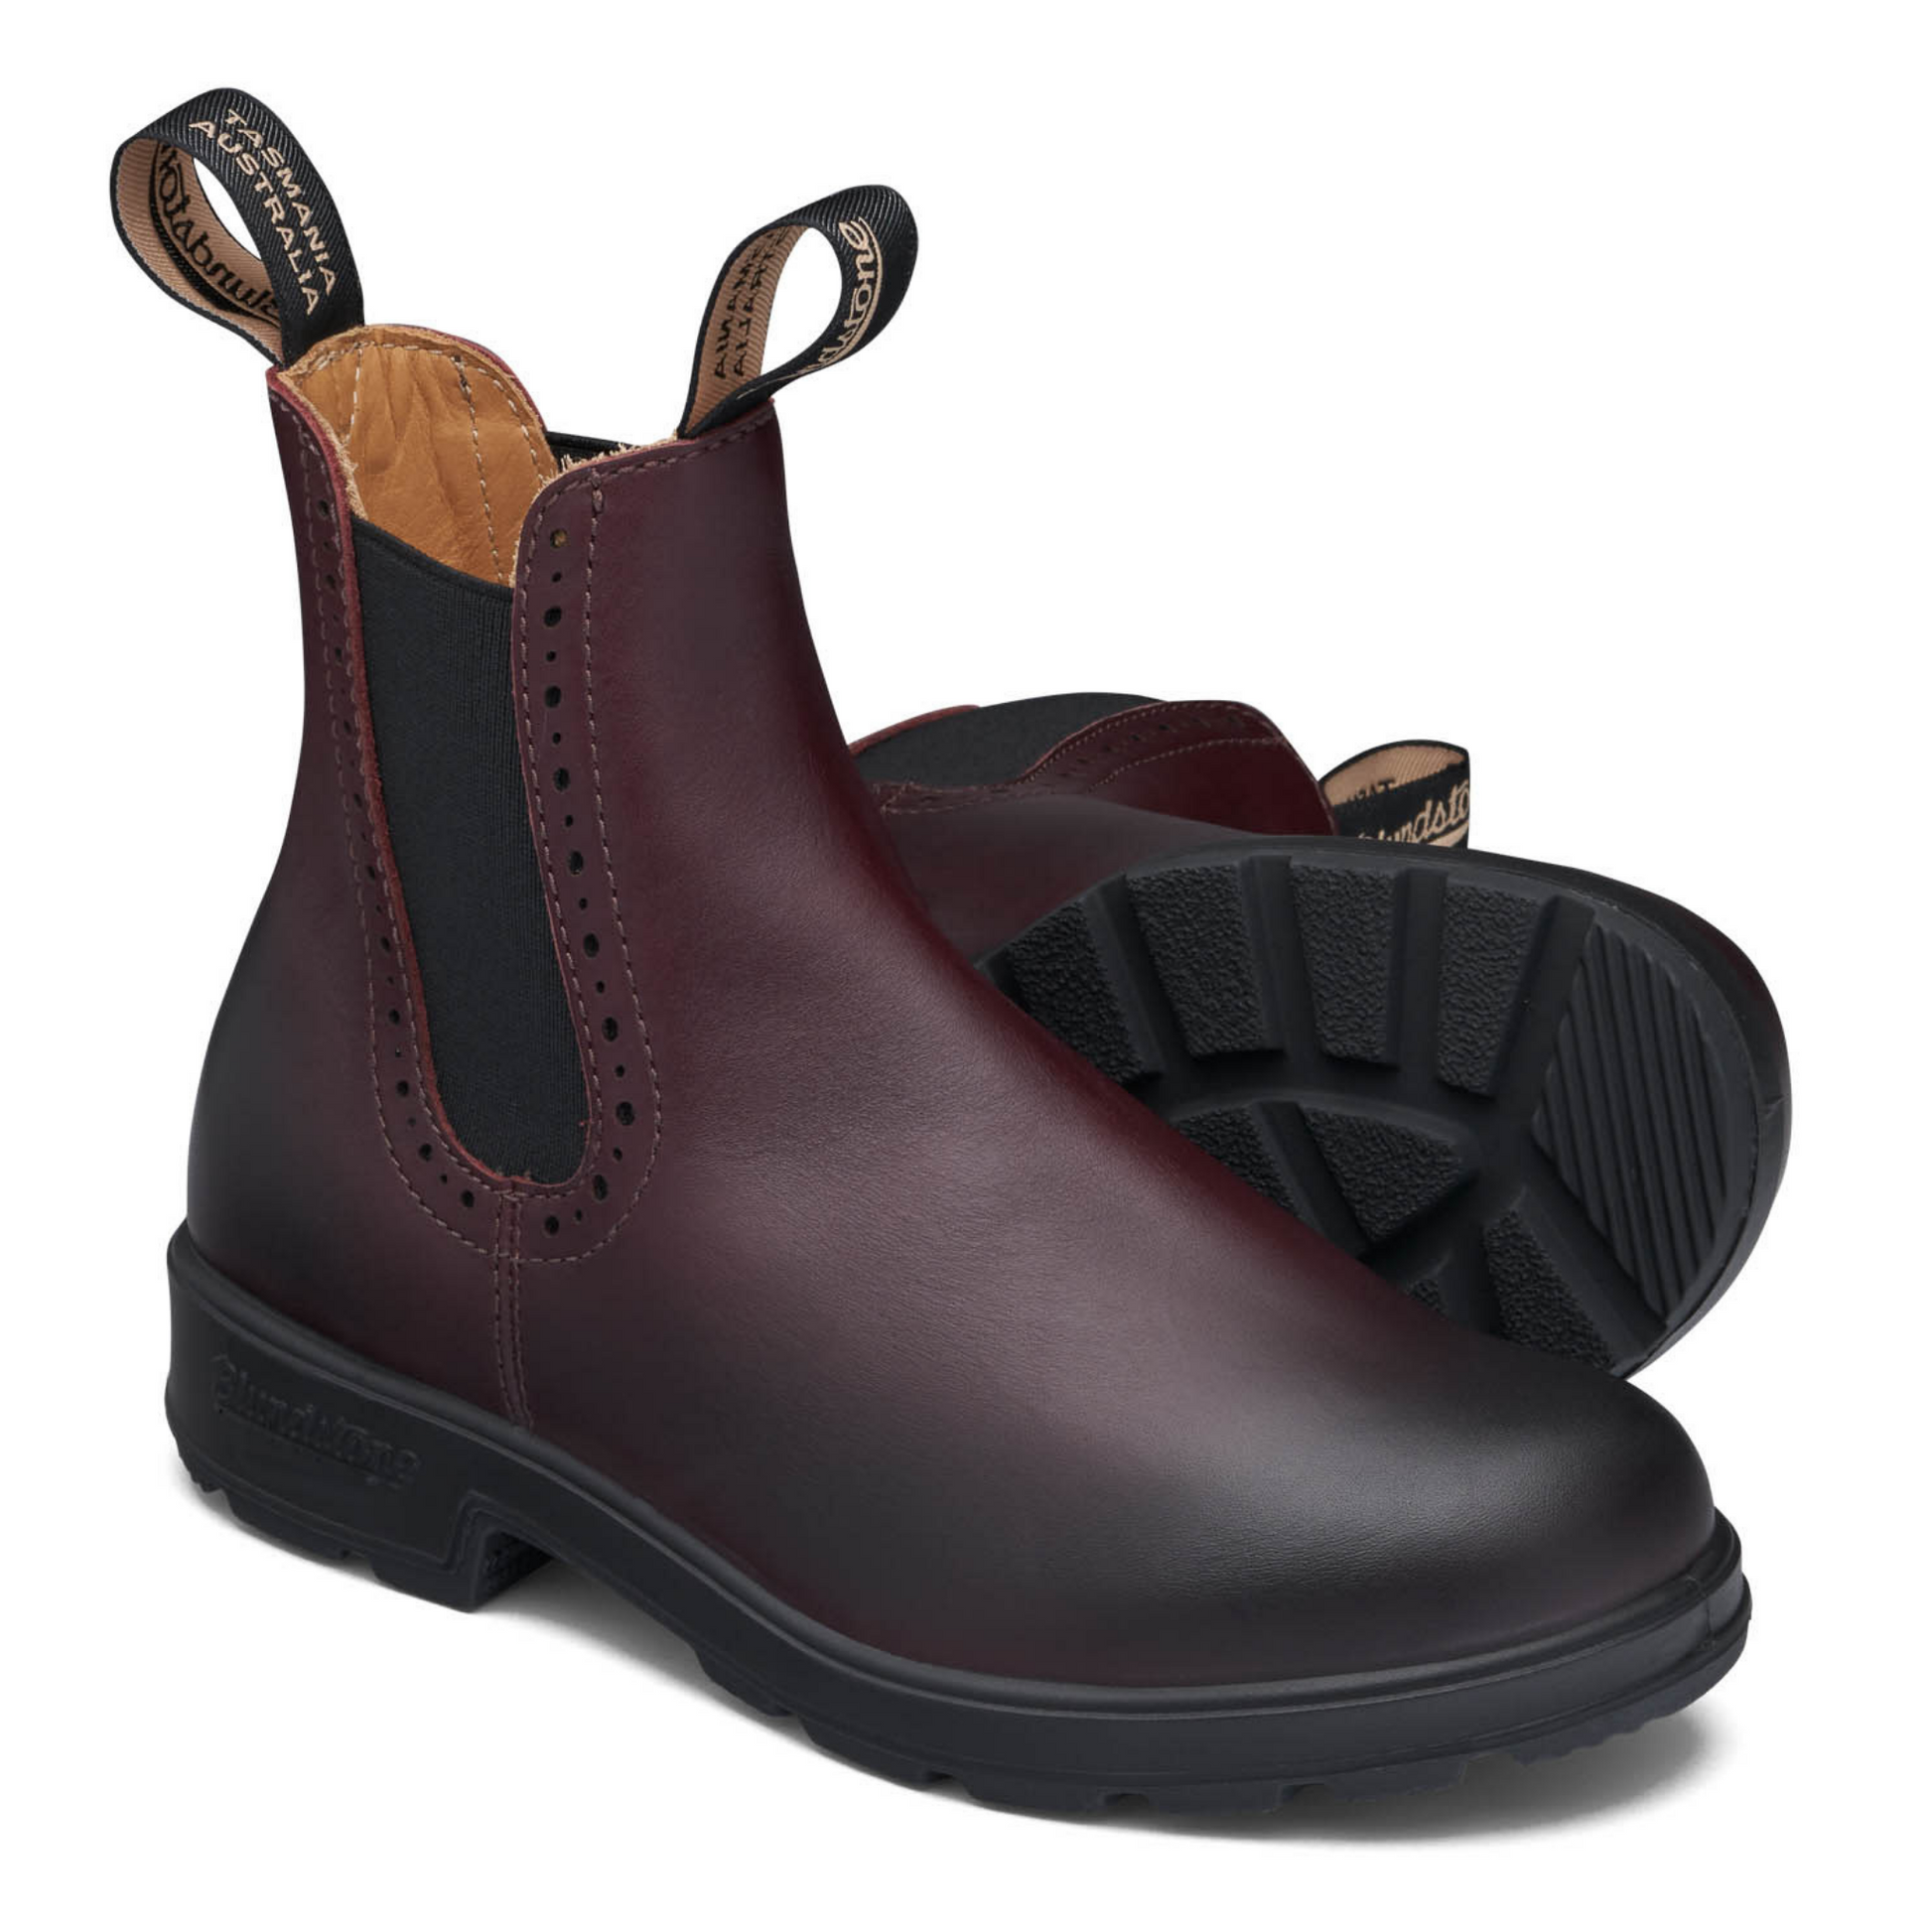 A pair of maroon coloured leather boots with brogue accent along the elastic sides.